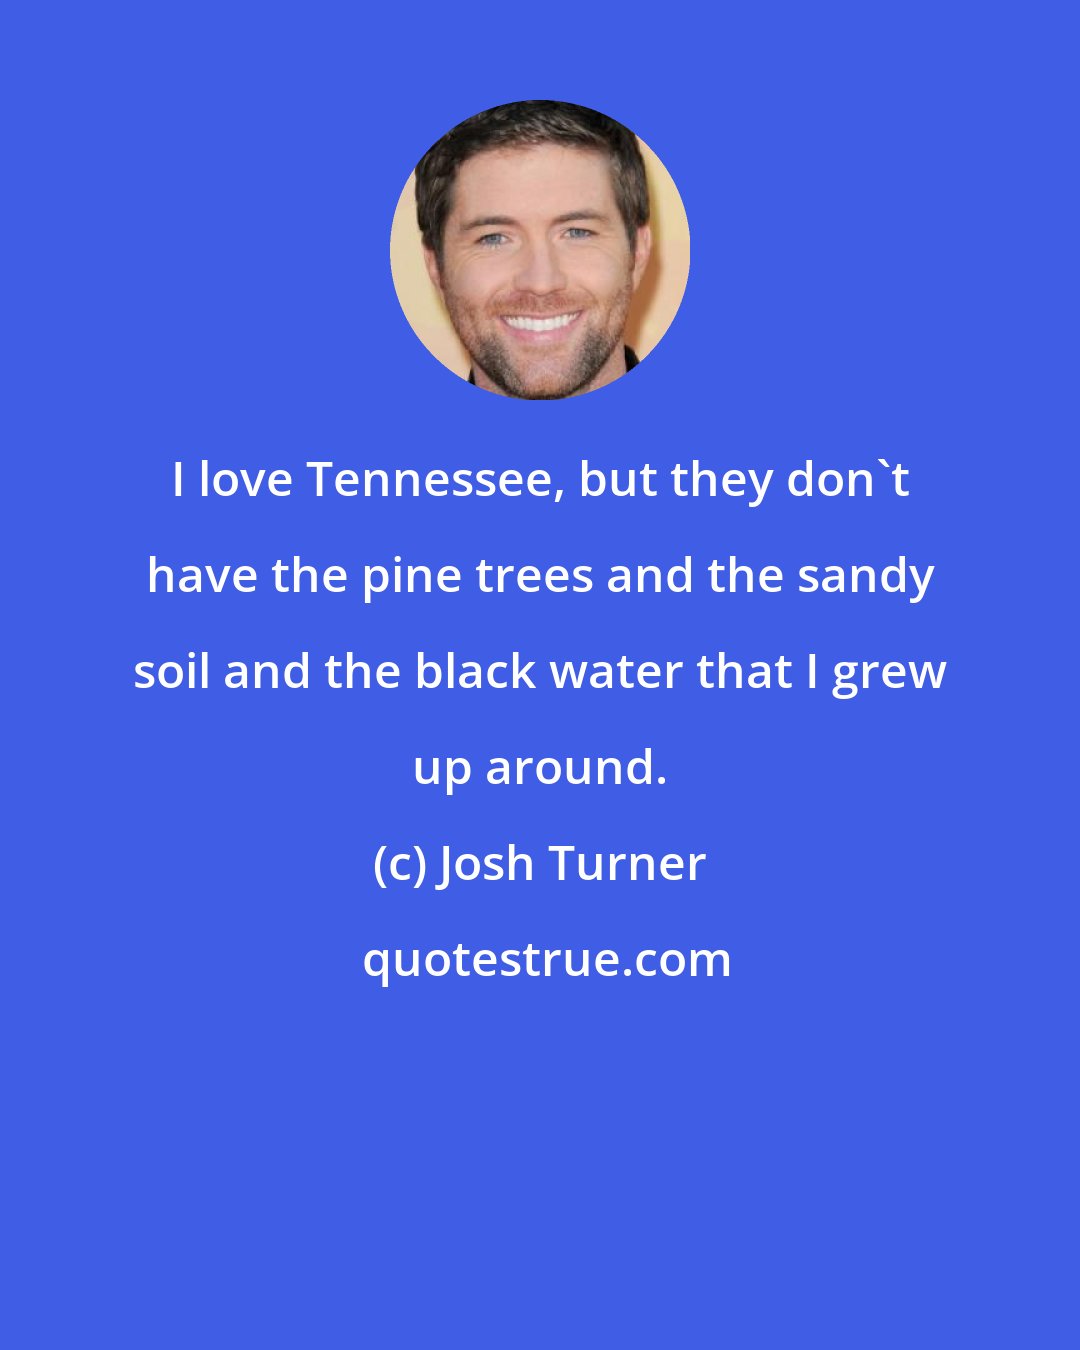 Josh Turner: I love Tennessee, but they don't have the pine trees and the sandy soil and the black water that I grew up around.